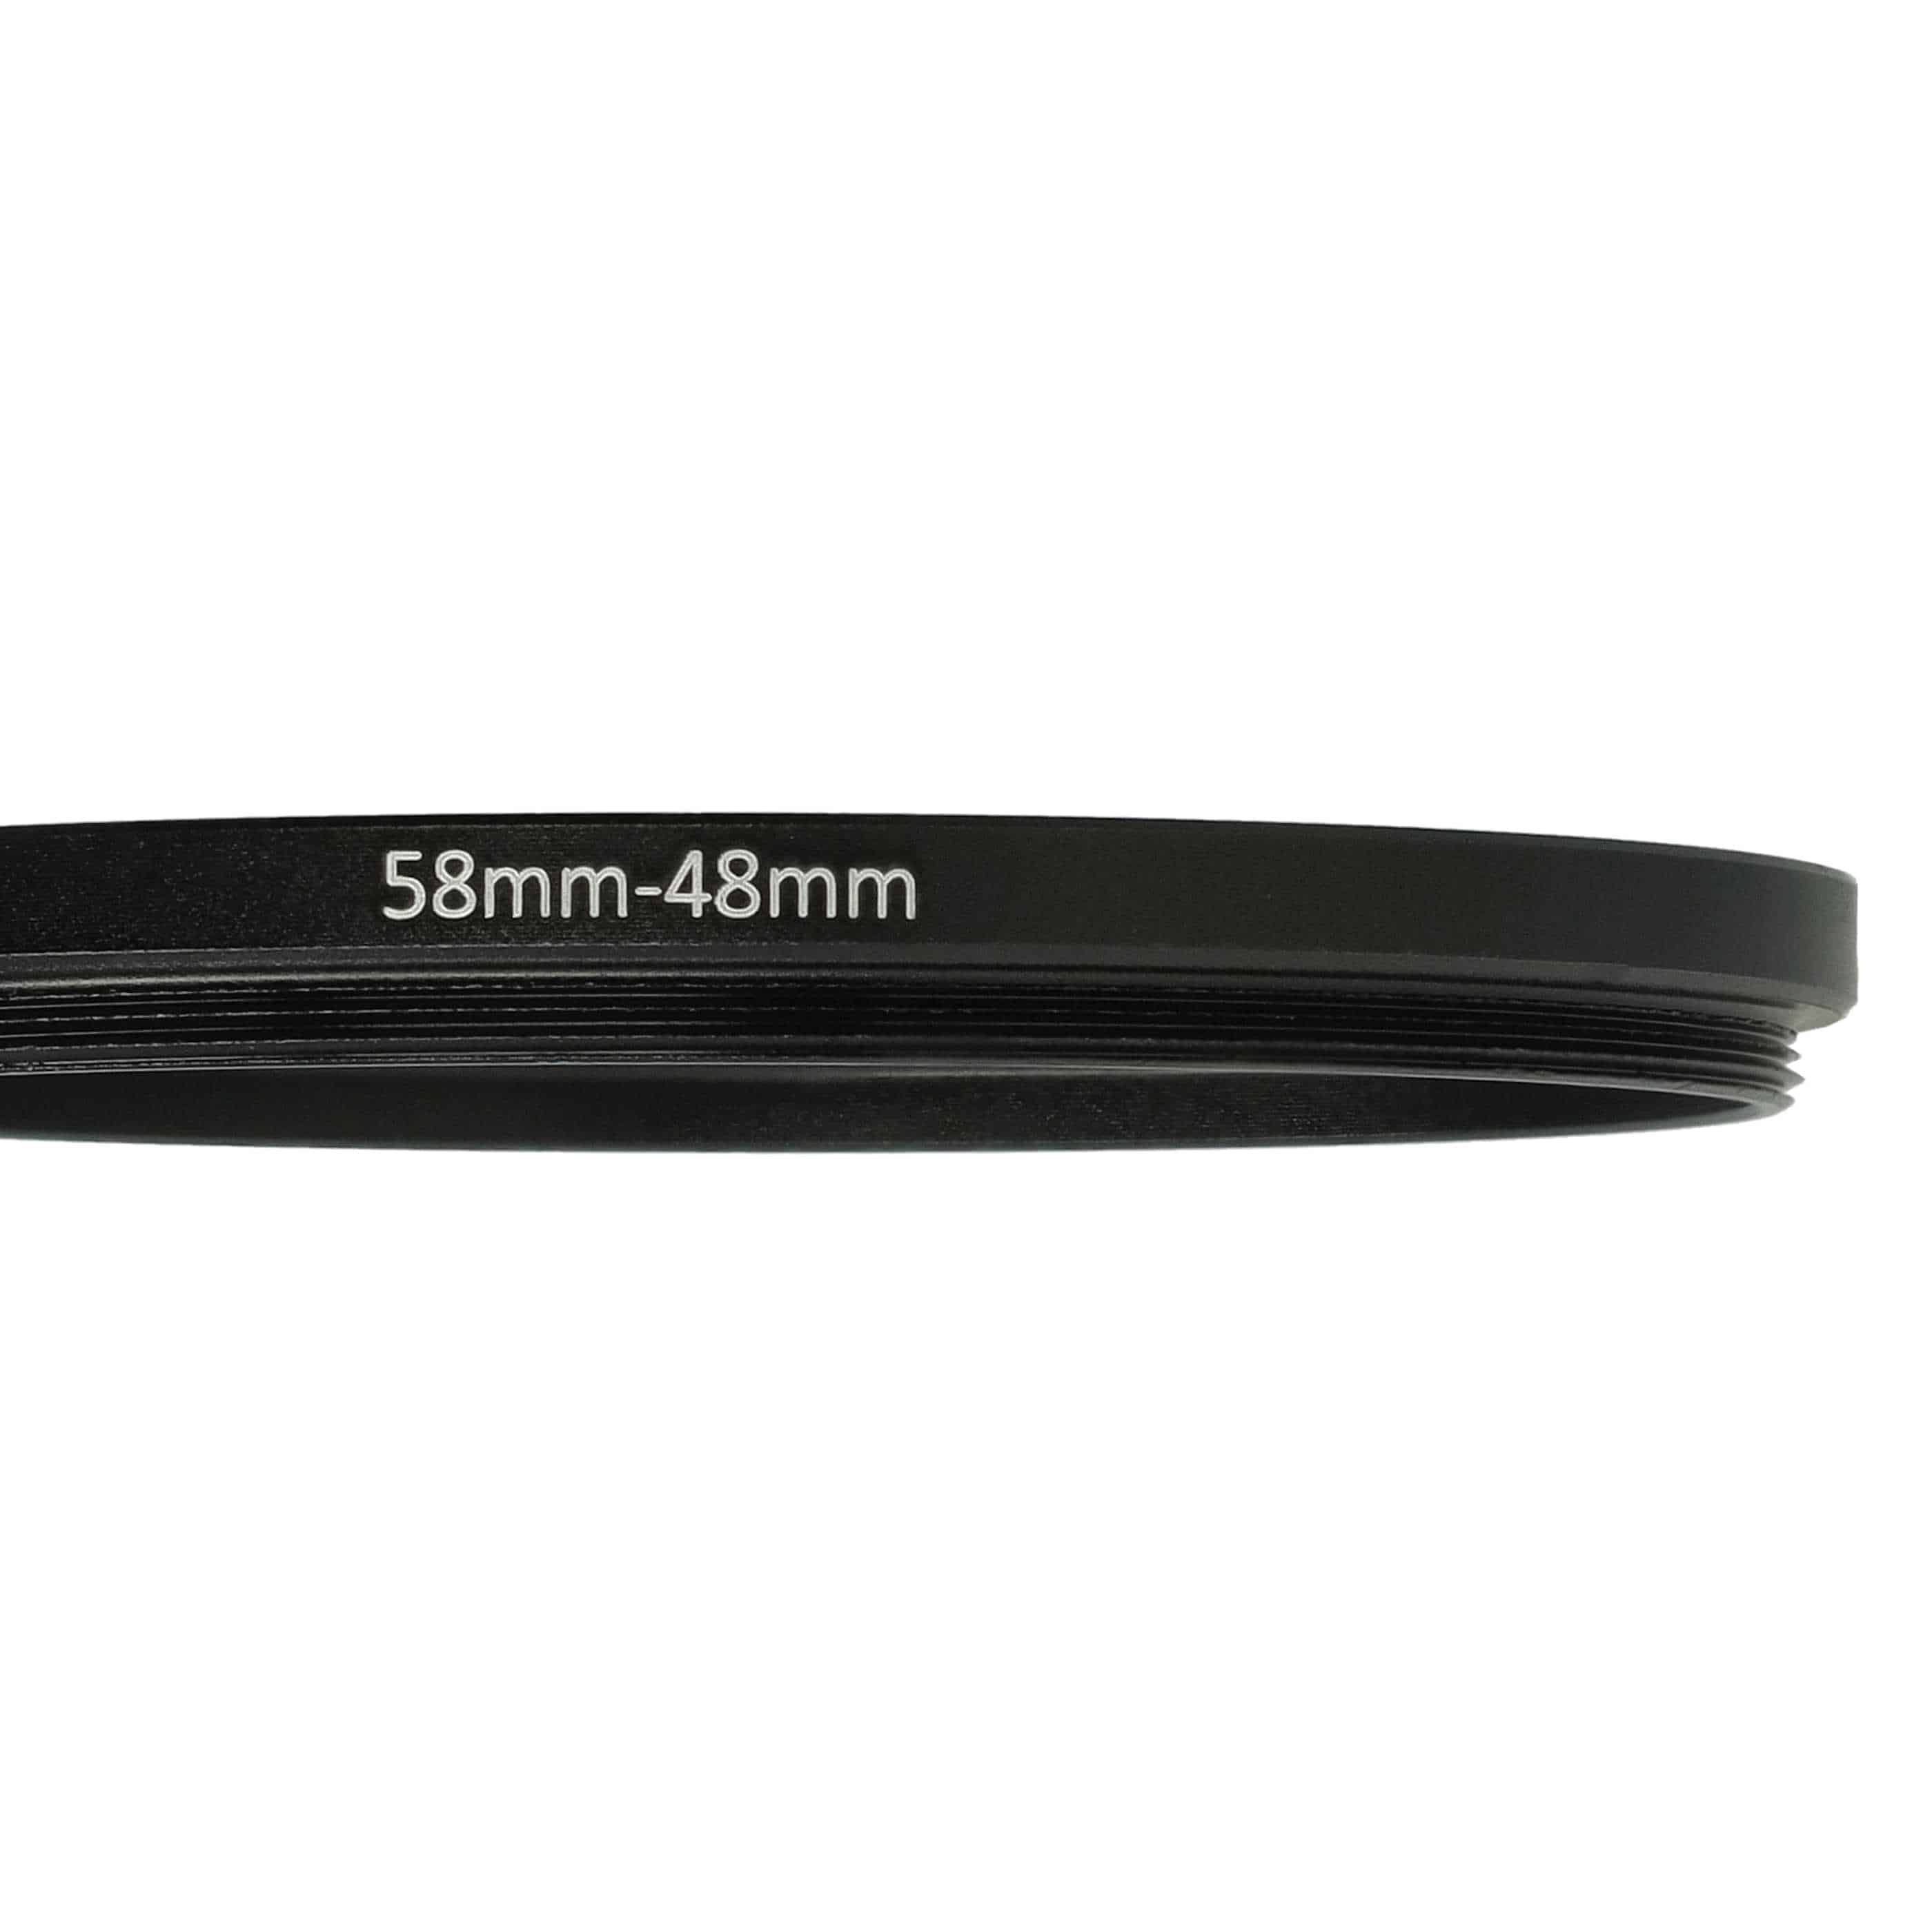 Step-Down Ring Adapter from 58 mm to 48 mm suitable for Camera Lens - Filter Adapter, metal